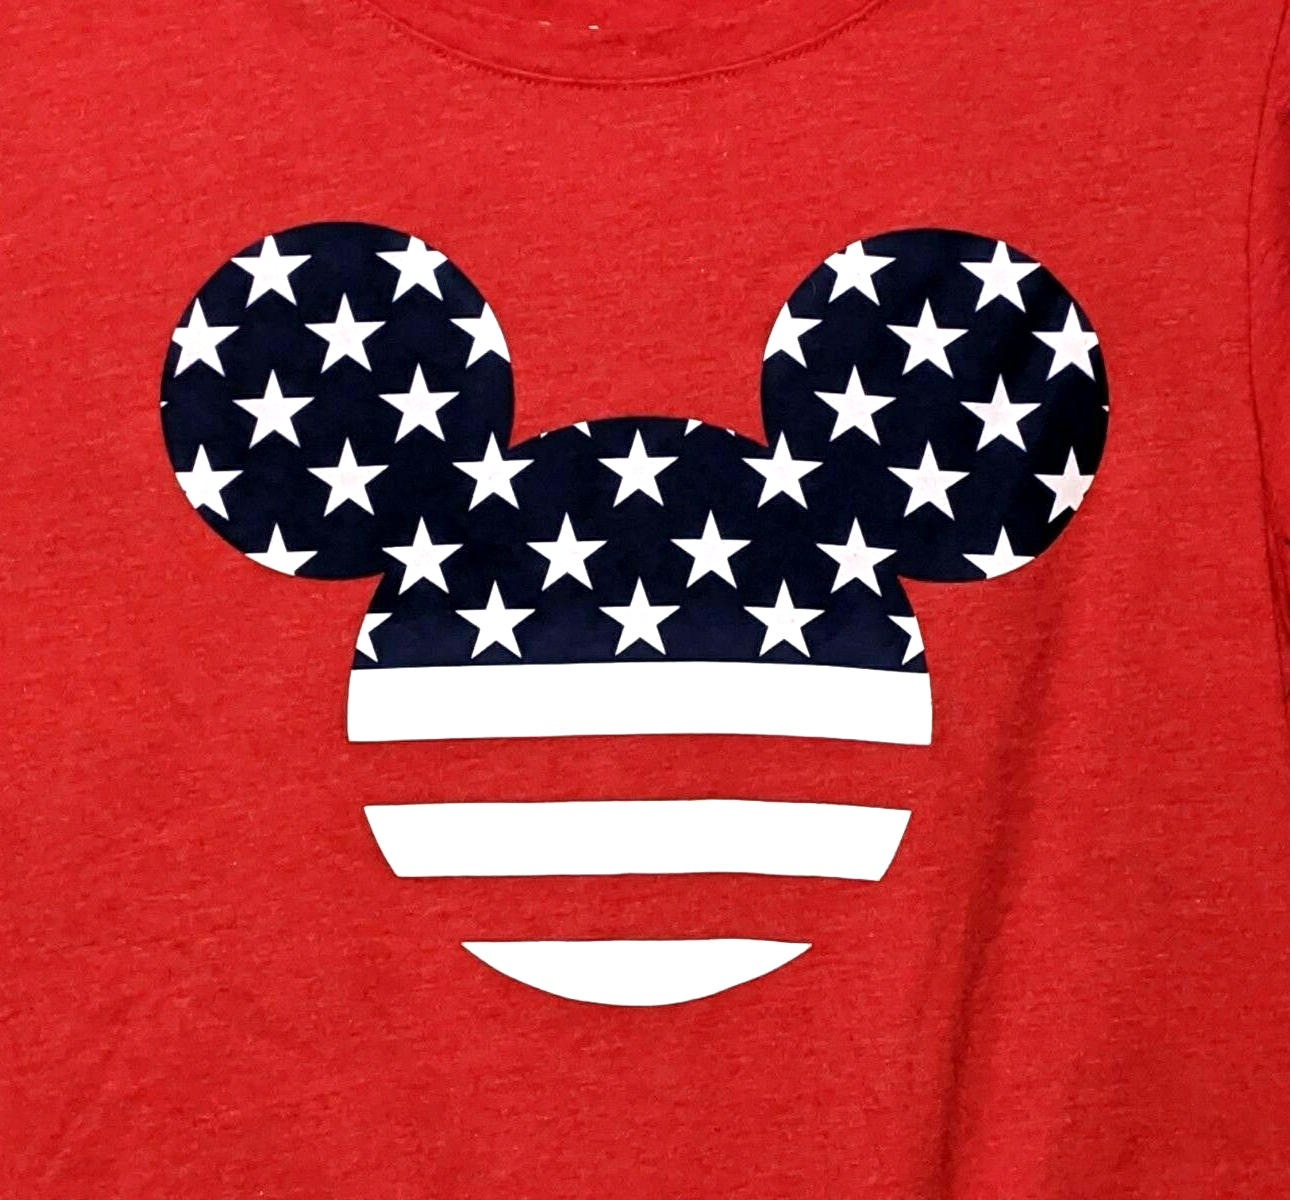 Authentic Disney Womens Mickey Mouse USA T-Shirt Tee U.S. Red White Blue Flag M - $7.87